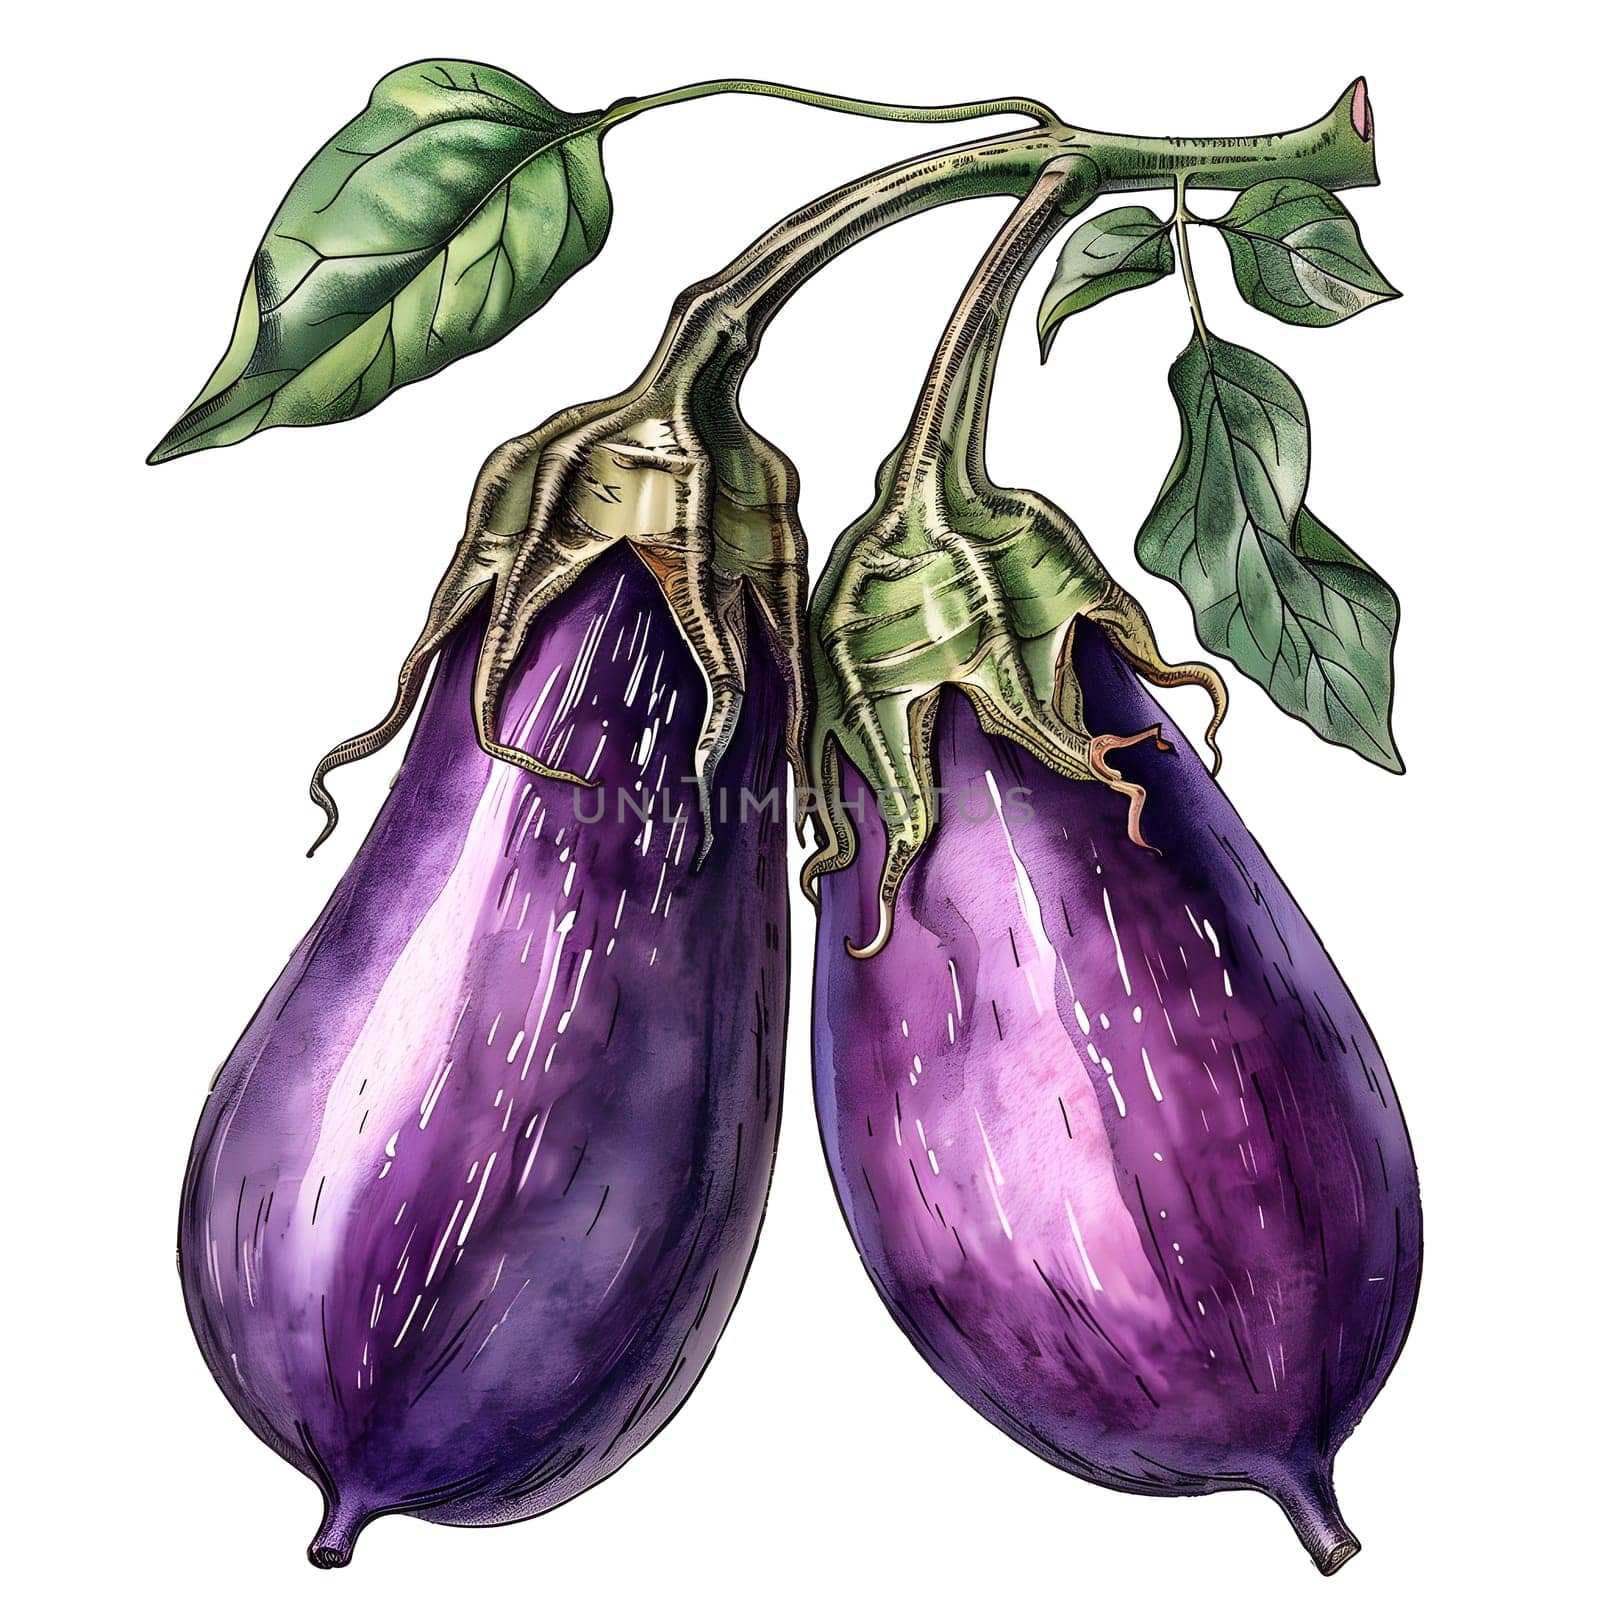 A vibrant illustration of two purple eggplants with green leaves hanging from a vine, showcasing the beauty of this flowering plant. Perfect inspiration for an art paint or drawing of natural foods